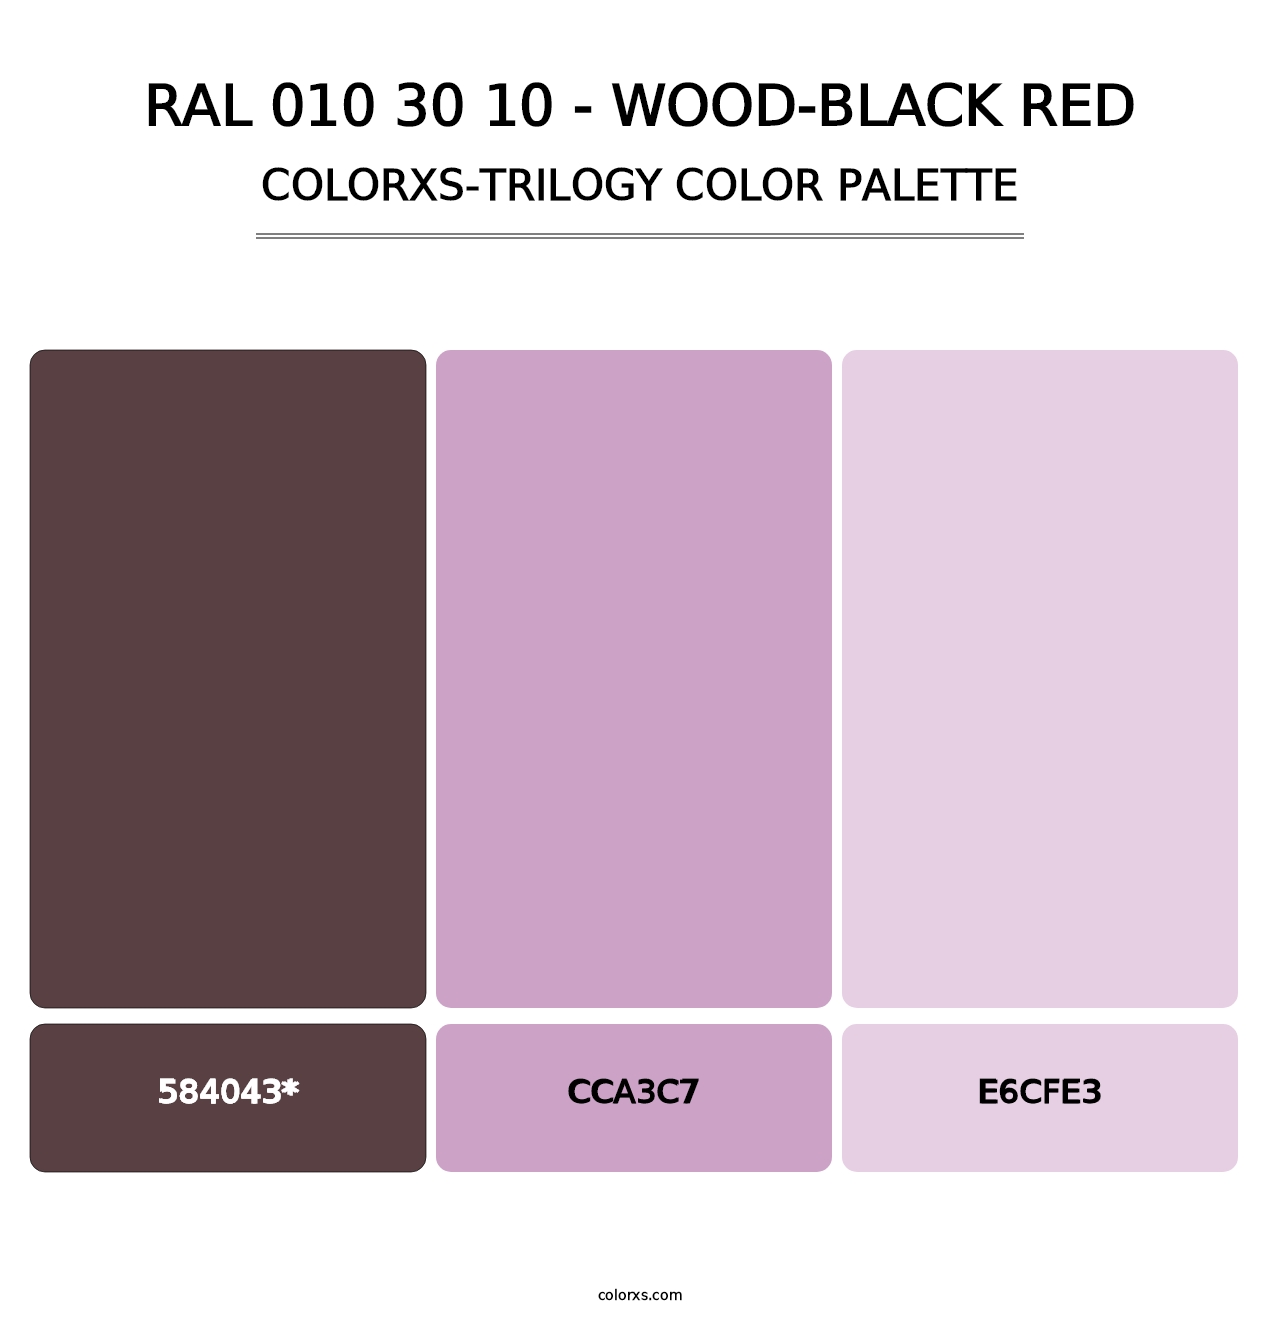 RAL 010 30 10 - Wood-Black Red - Colorxs Trilogy Palette